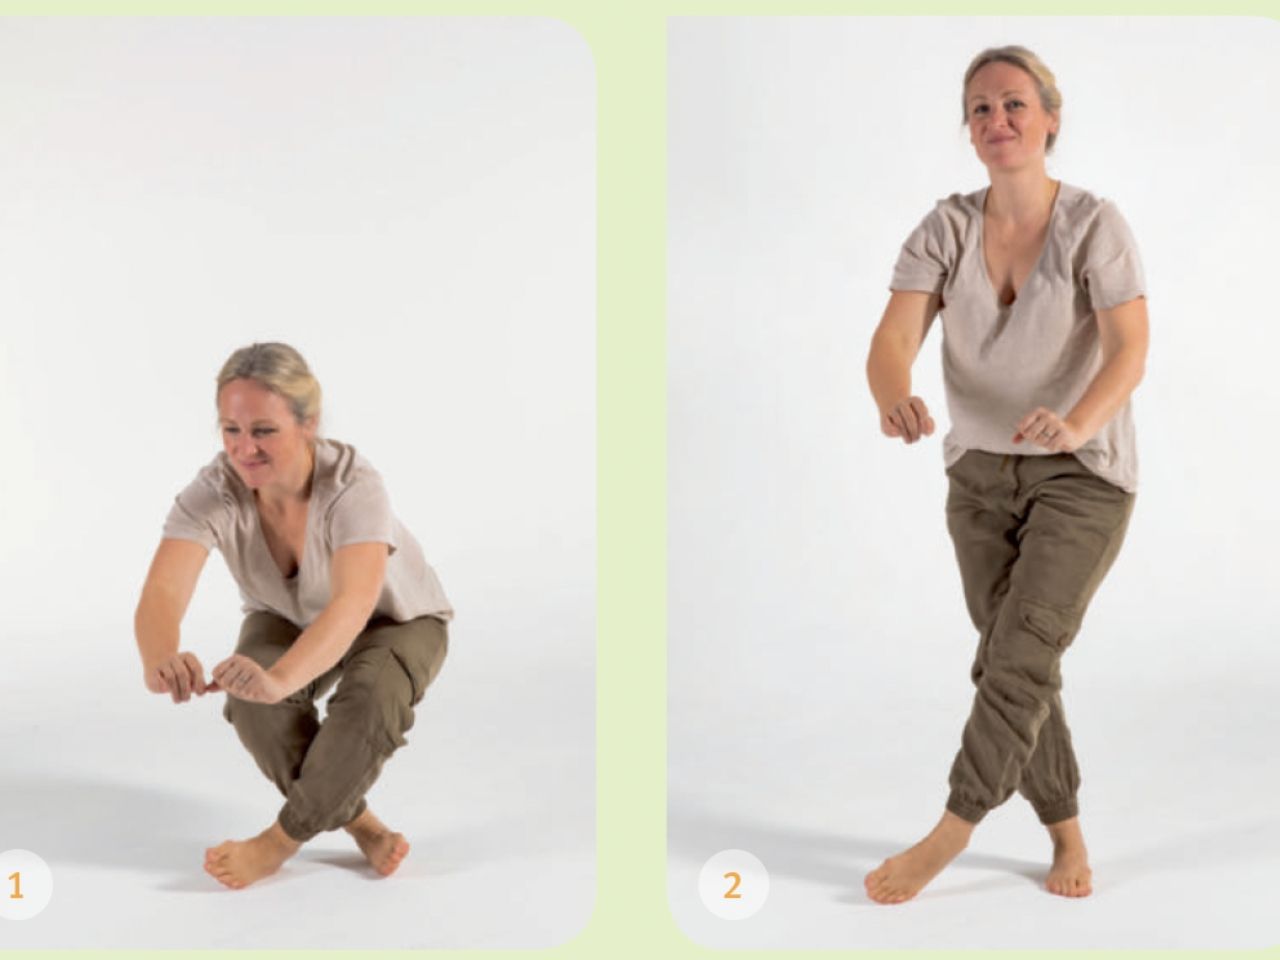 Three images of a woman performing a squat exercise, demonstrating correct form and technique.